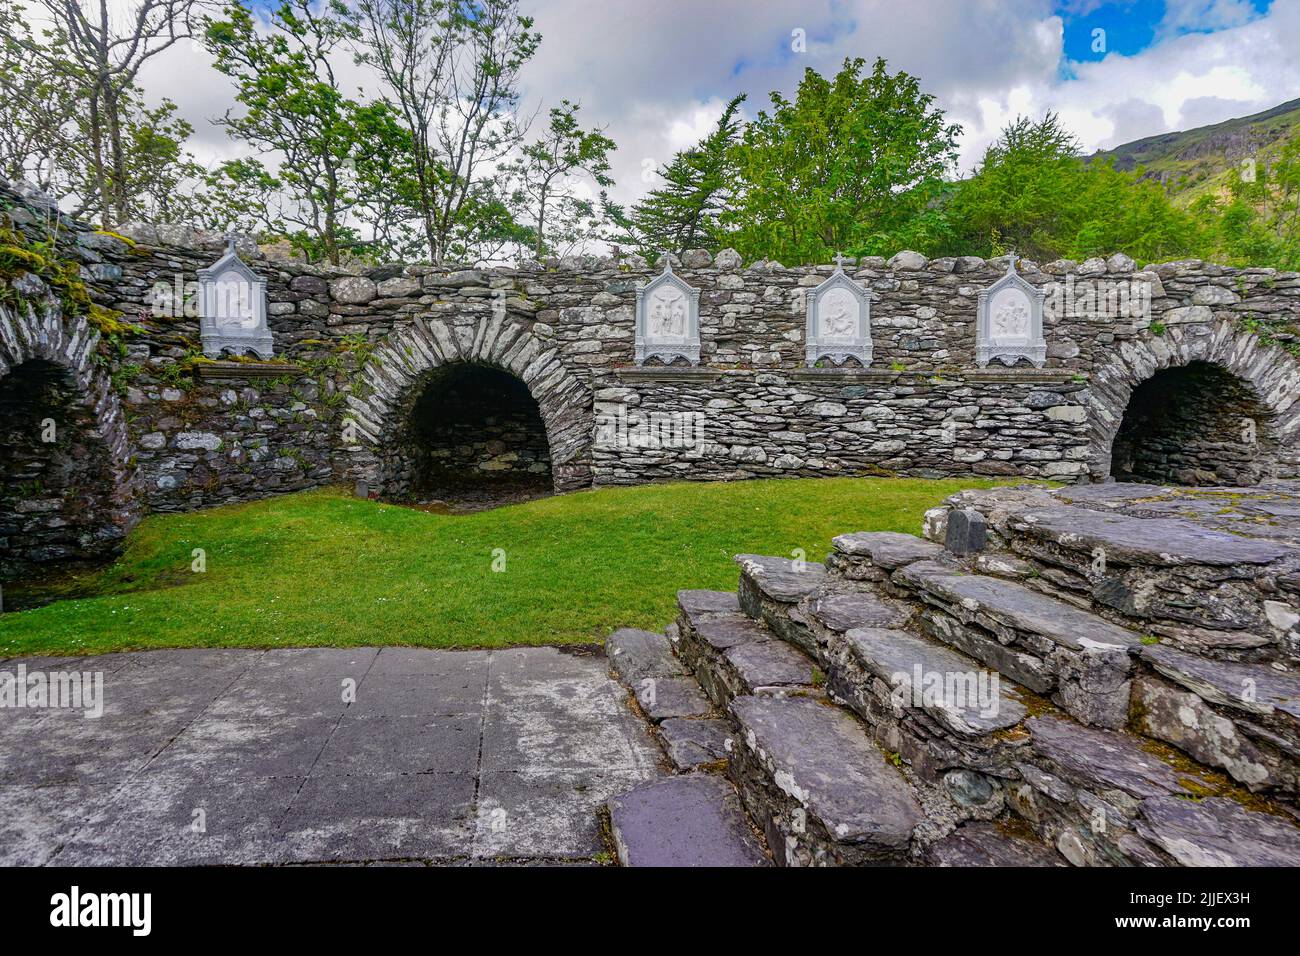 Gougane Barra, Co. Cork, Ireland: Ruins of a hermitage dating from around 1700, in a scenic valley and heritage site in the Shehy Mountains. Stock Photo